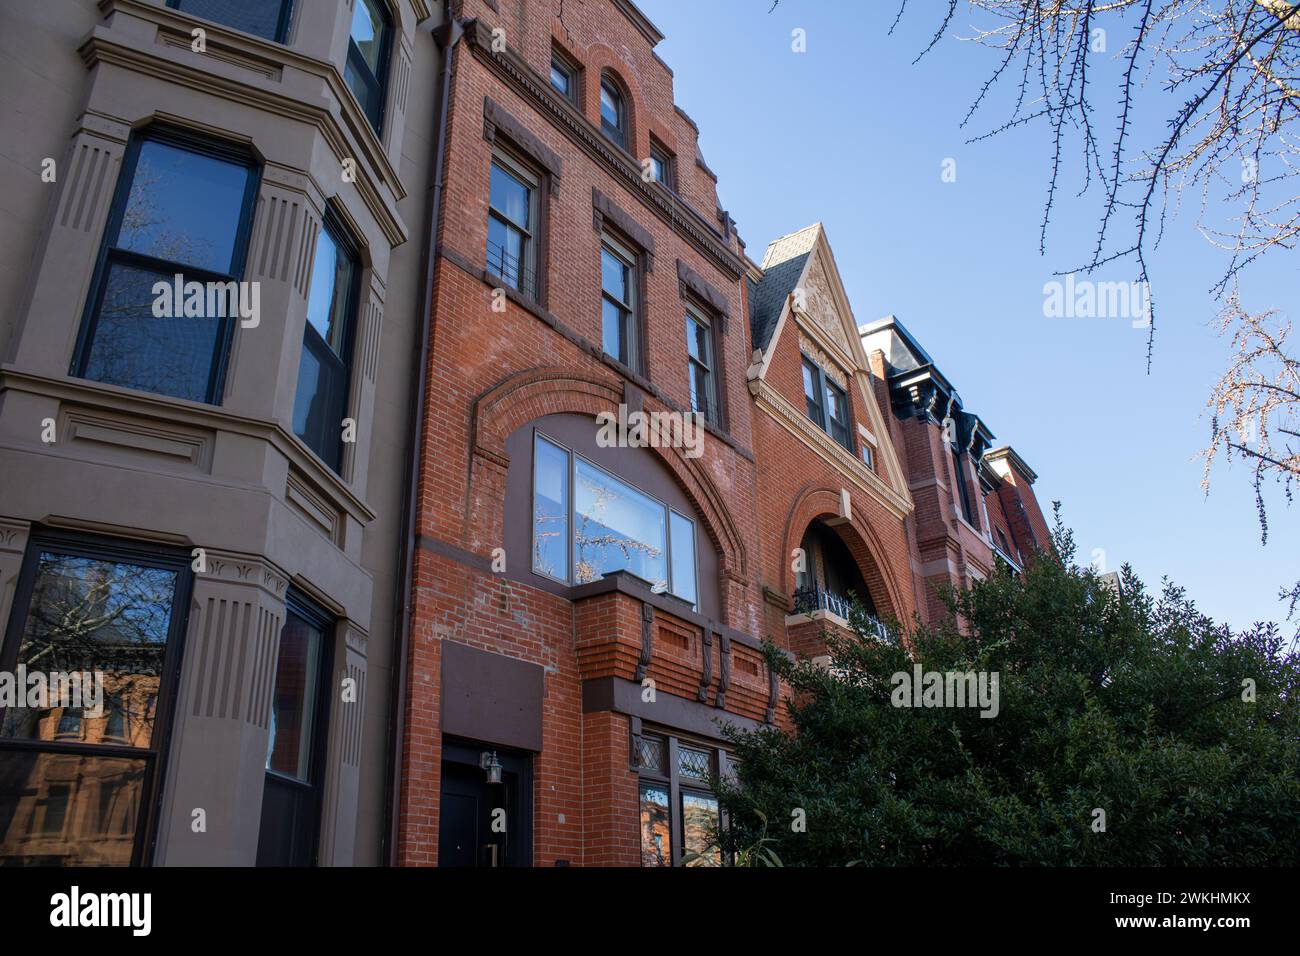 The multiple rows of houses line a vibrant street in New York, United States Stock Photo